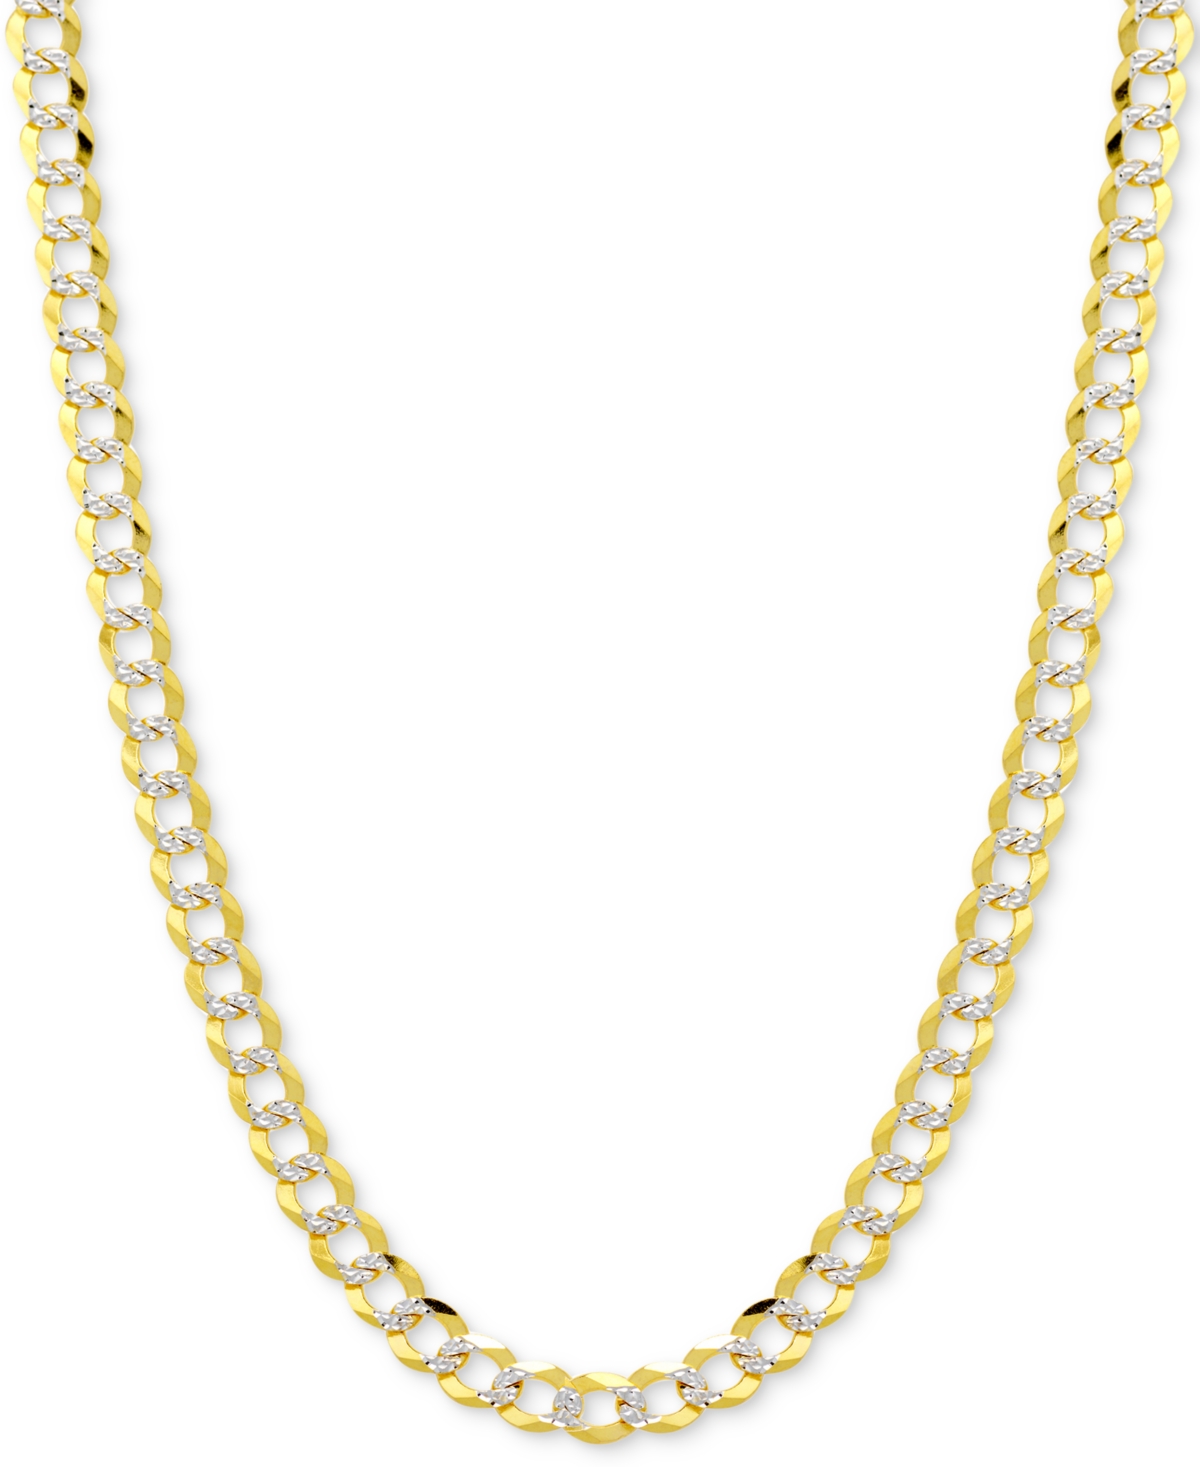 28" Two-Tone Open Curb Chain Necklace in Solid 14k Gold & White Gold - Two-Tone